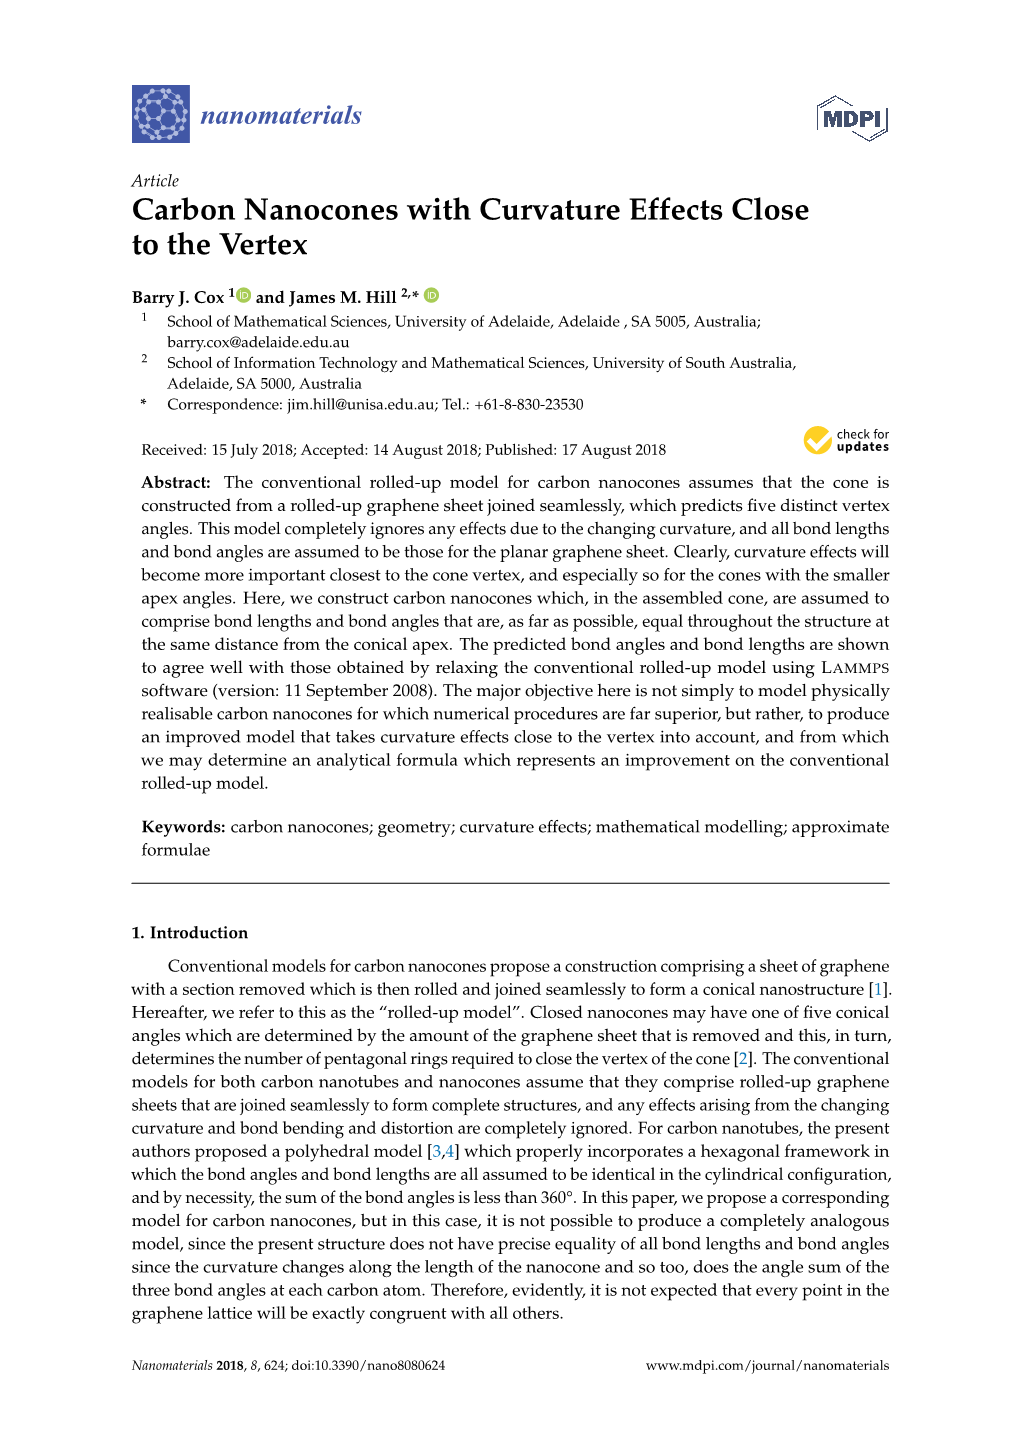 Carbon Nanocones with Curvature Effects Close to the Vertex